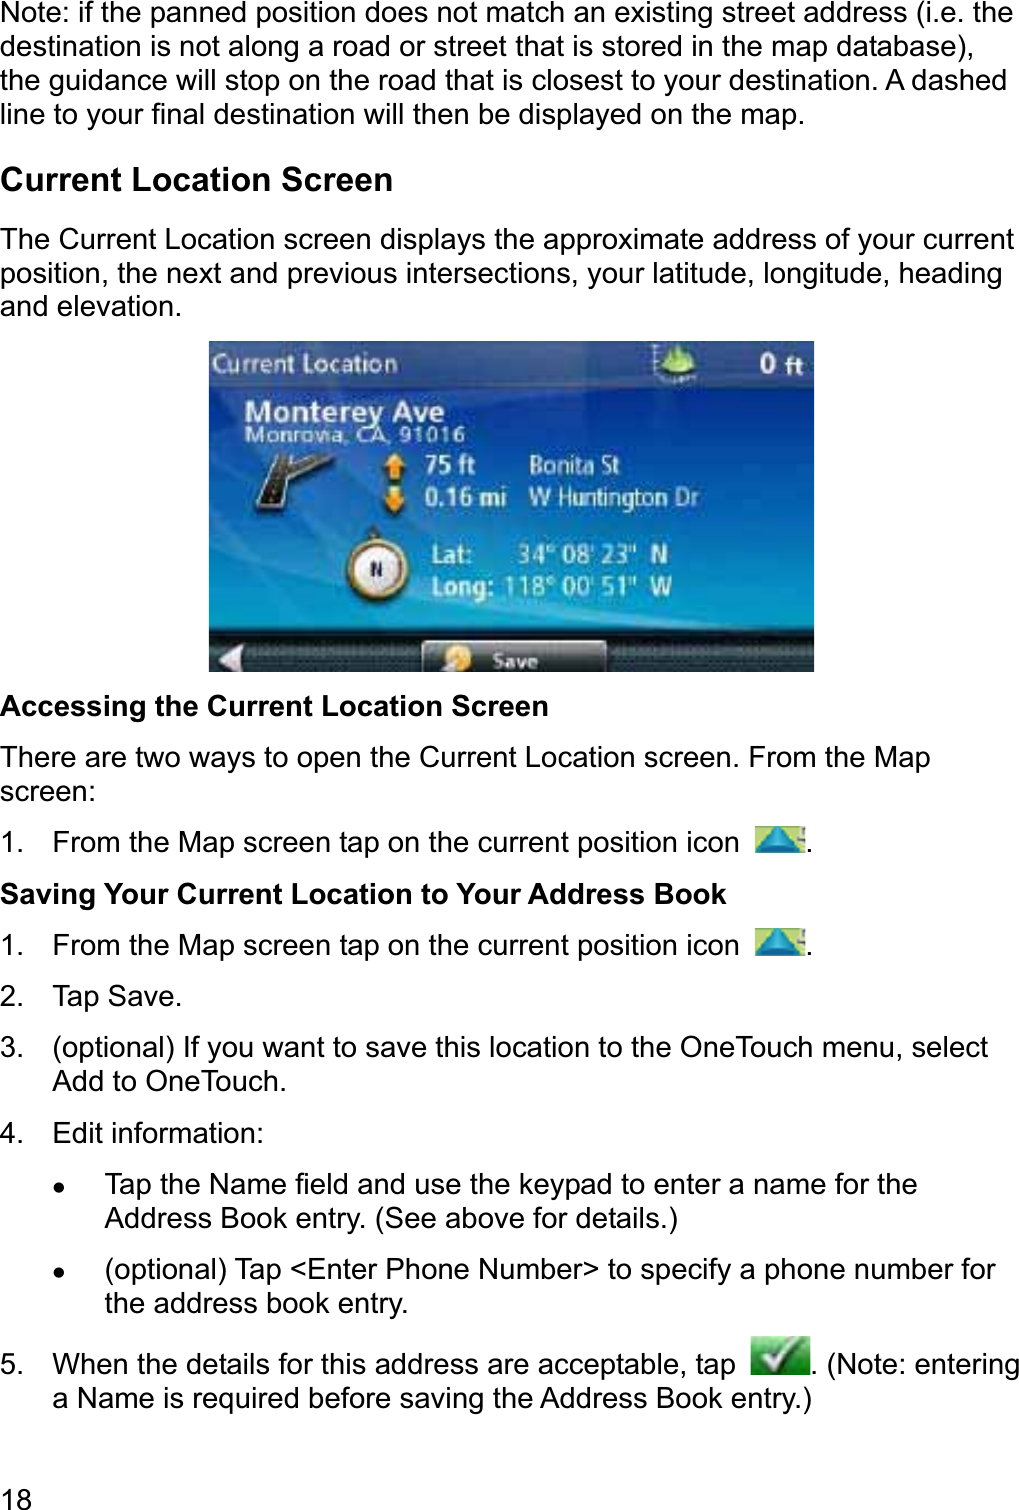 18Note: if the panned position does not match an existing street address (i.e. the destination is not along a road or street that is stored in the map database), the guidance will stop on the road that is closest to your destination. A dashed line to your final destination will then be displayed on the map. Current Location Screen The Current Location screen displays the approximate address of your current position, the next and previous intersections, your latitude, longitude, heading and elevation. Accessing the Current Location Screen There are two ways to open the Current Location screen. From the Map screen: 1.  From the Map screen tap on the current position icon  .Saving Your Current Location to Your Address Book 1.  From the Map screen tap on the current position icon  .2. Tap Save. 3.  (optional) If you want to save this location to the OneTouch menu, select Add to OneTouch. 4. Edit information: zTap the Name field and use the keypad to enter a name for the Address Book entry. (See above for details.) z(optional) Tap &lt;Enter Phone Number&gt; to specify a phone number for the address book entry. 5.  When the details for this address are acceptable, tap  . (Note: entering a Name is required before saving the Address Book entry.) 